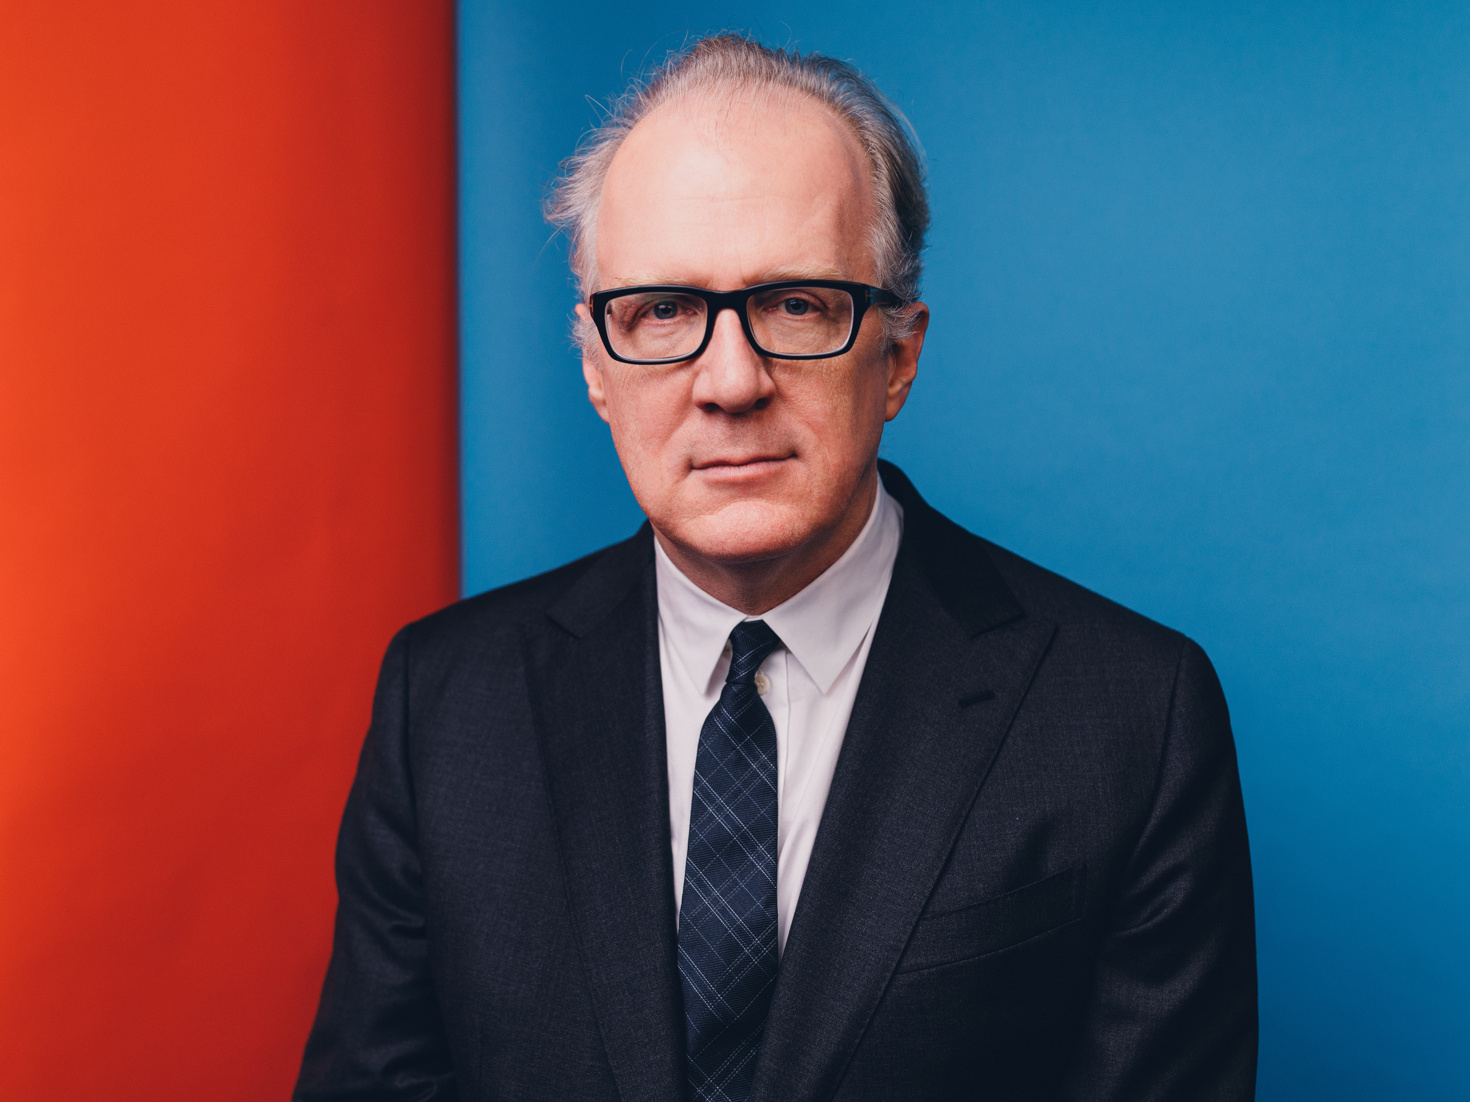 tracy letts play on broadway